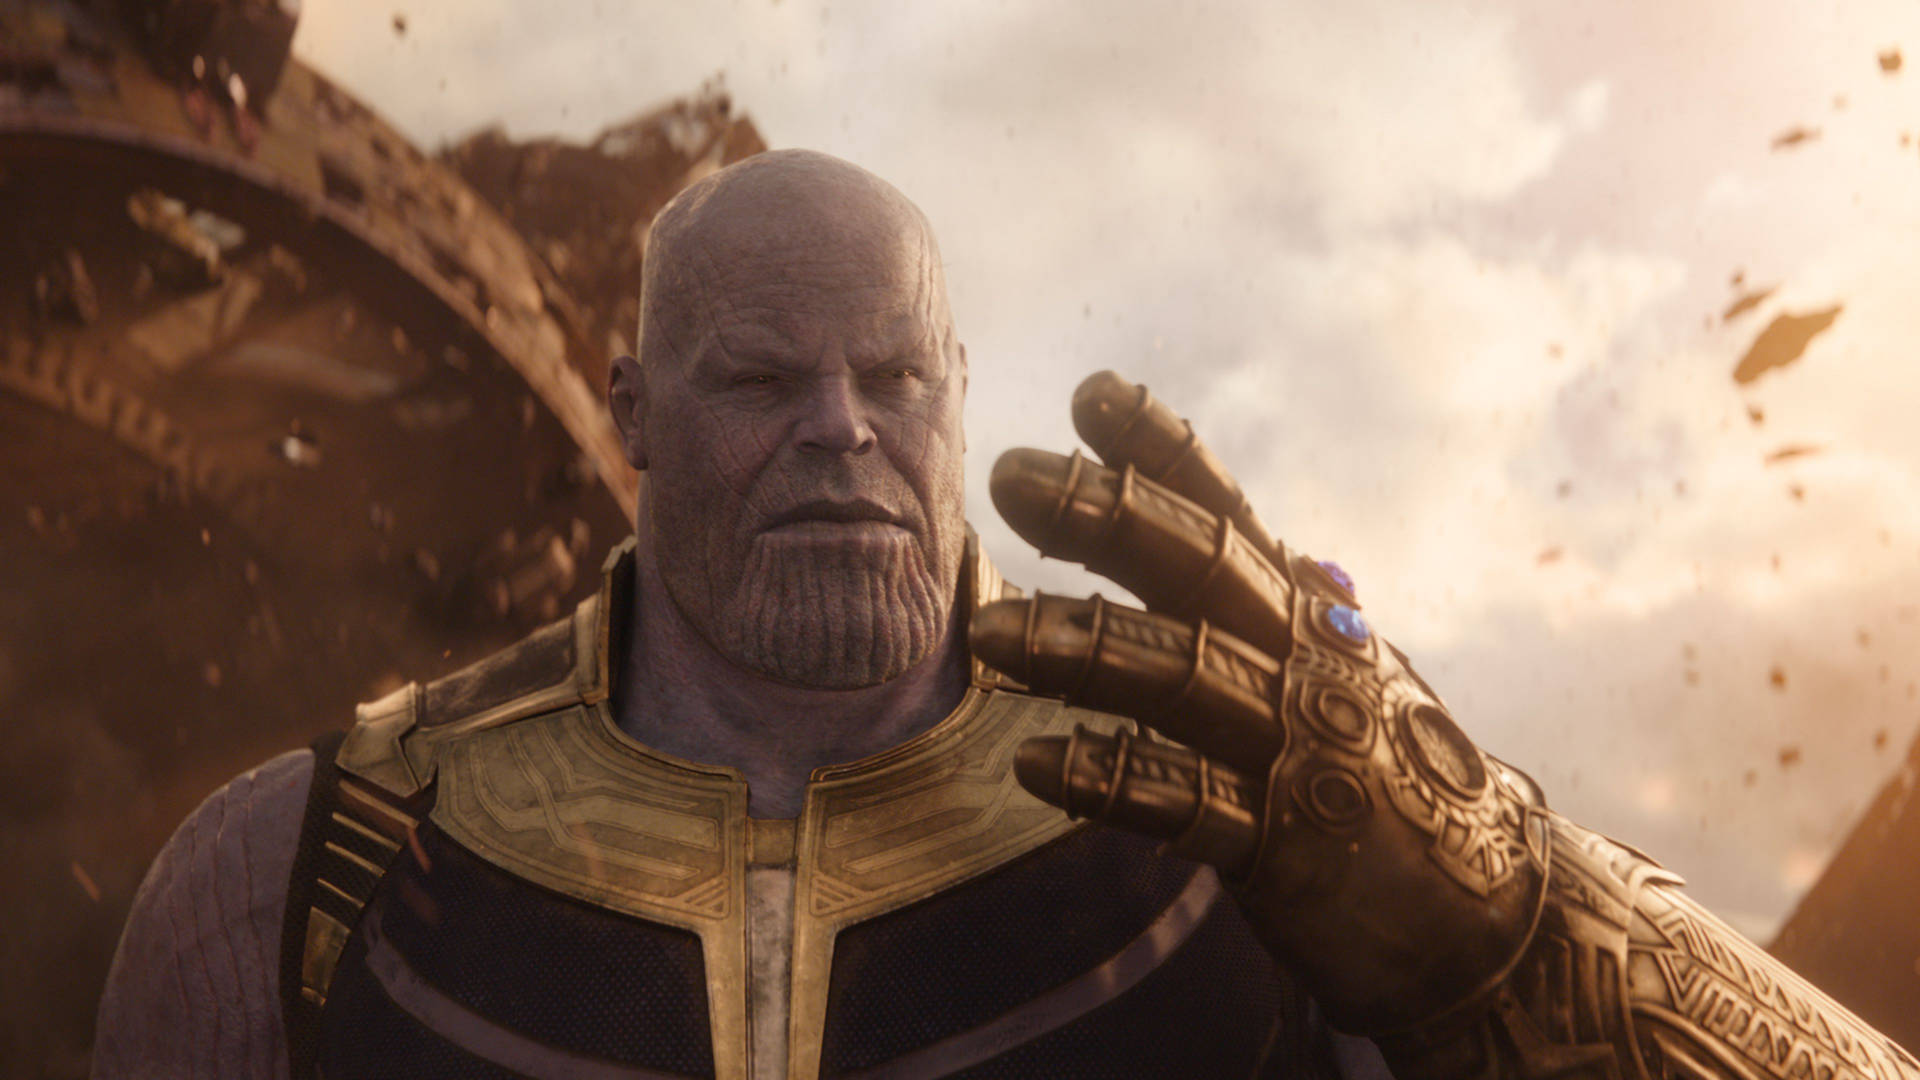 Thanos 3840X2160 Wallpaper and Background Image